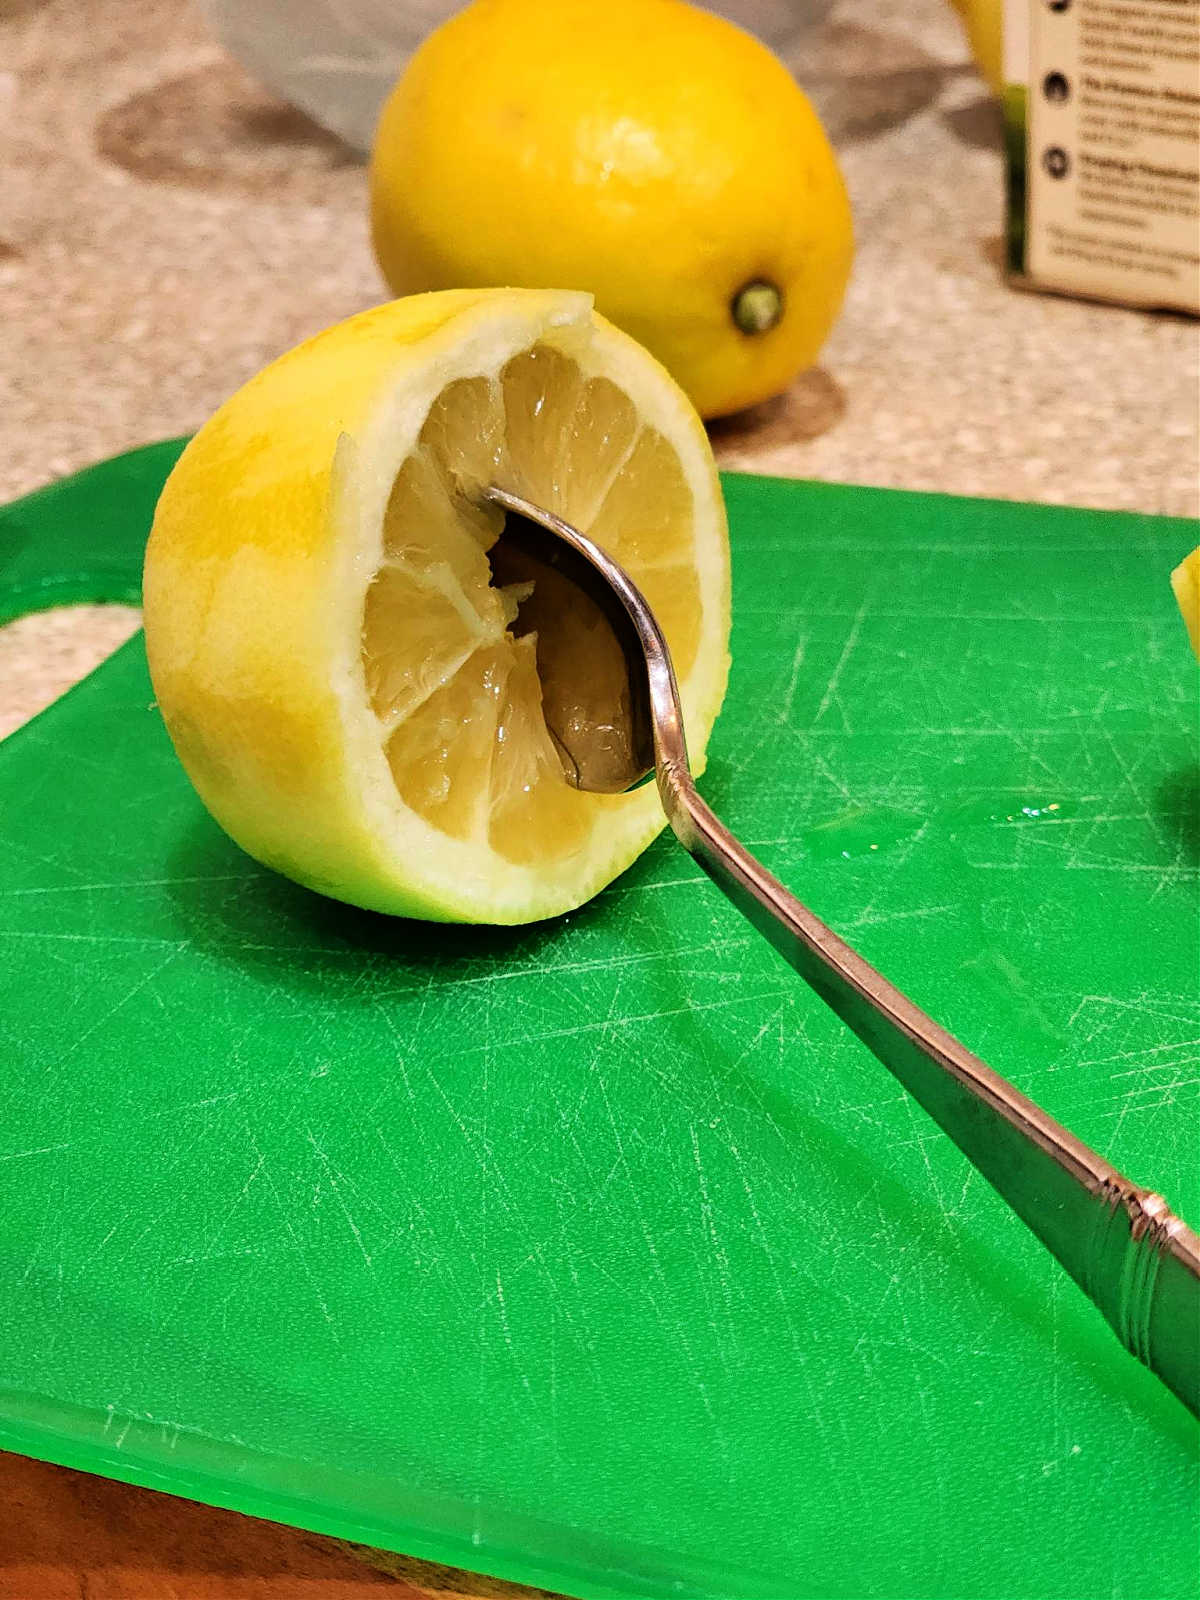 Half a lemon on a green cutting board with the bowl of a spoon inserted in the center.